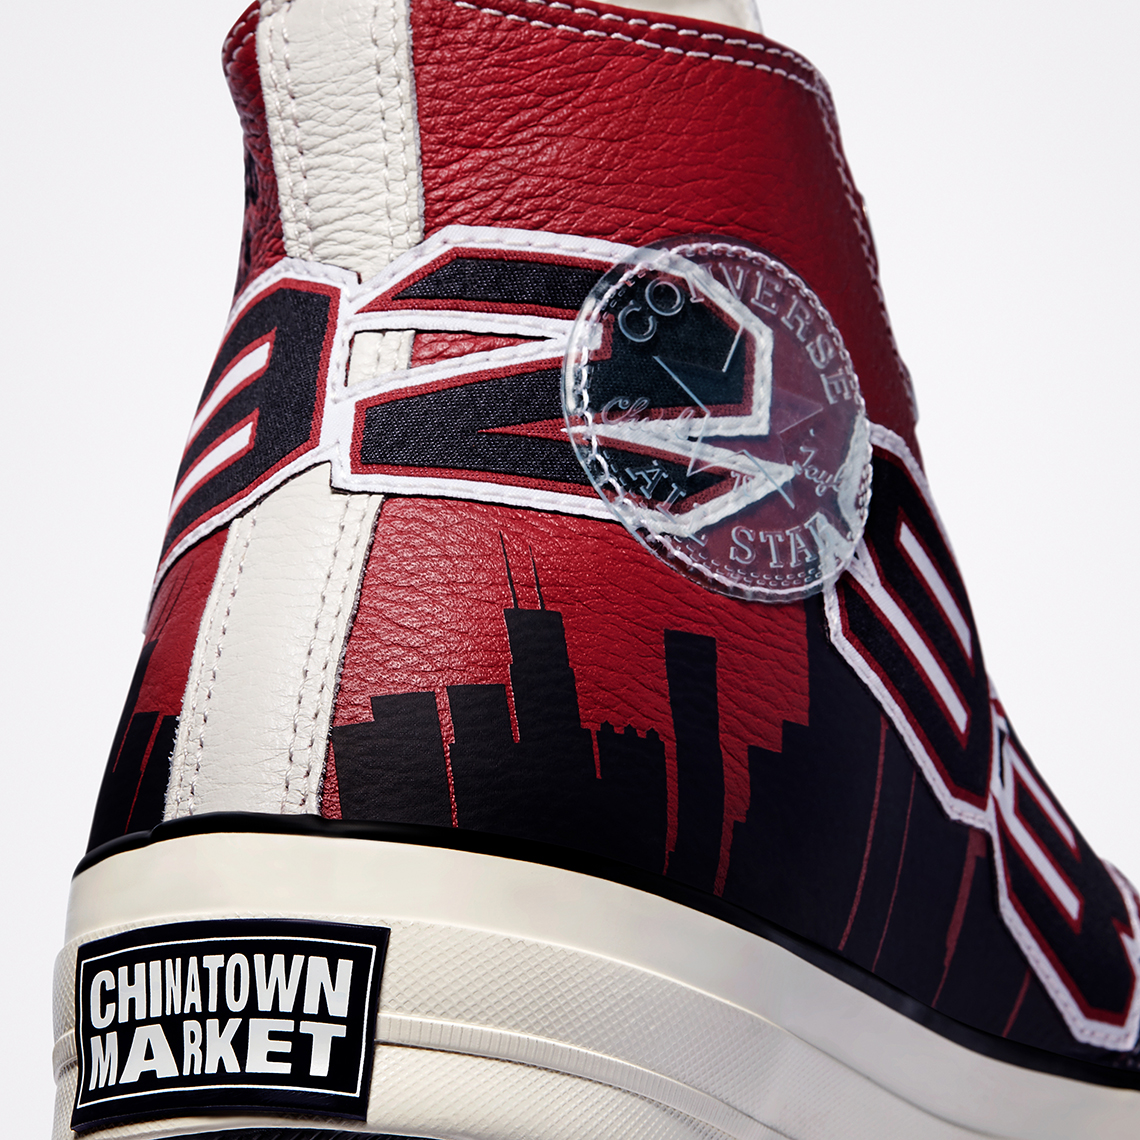 Chinatown Market The Converse Chuck Taylor 2 will be part of Converse latest collaboration Bulls 4